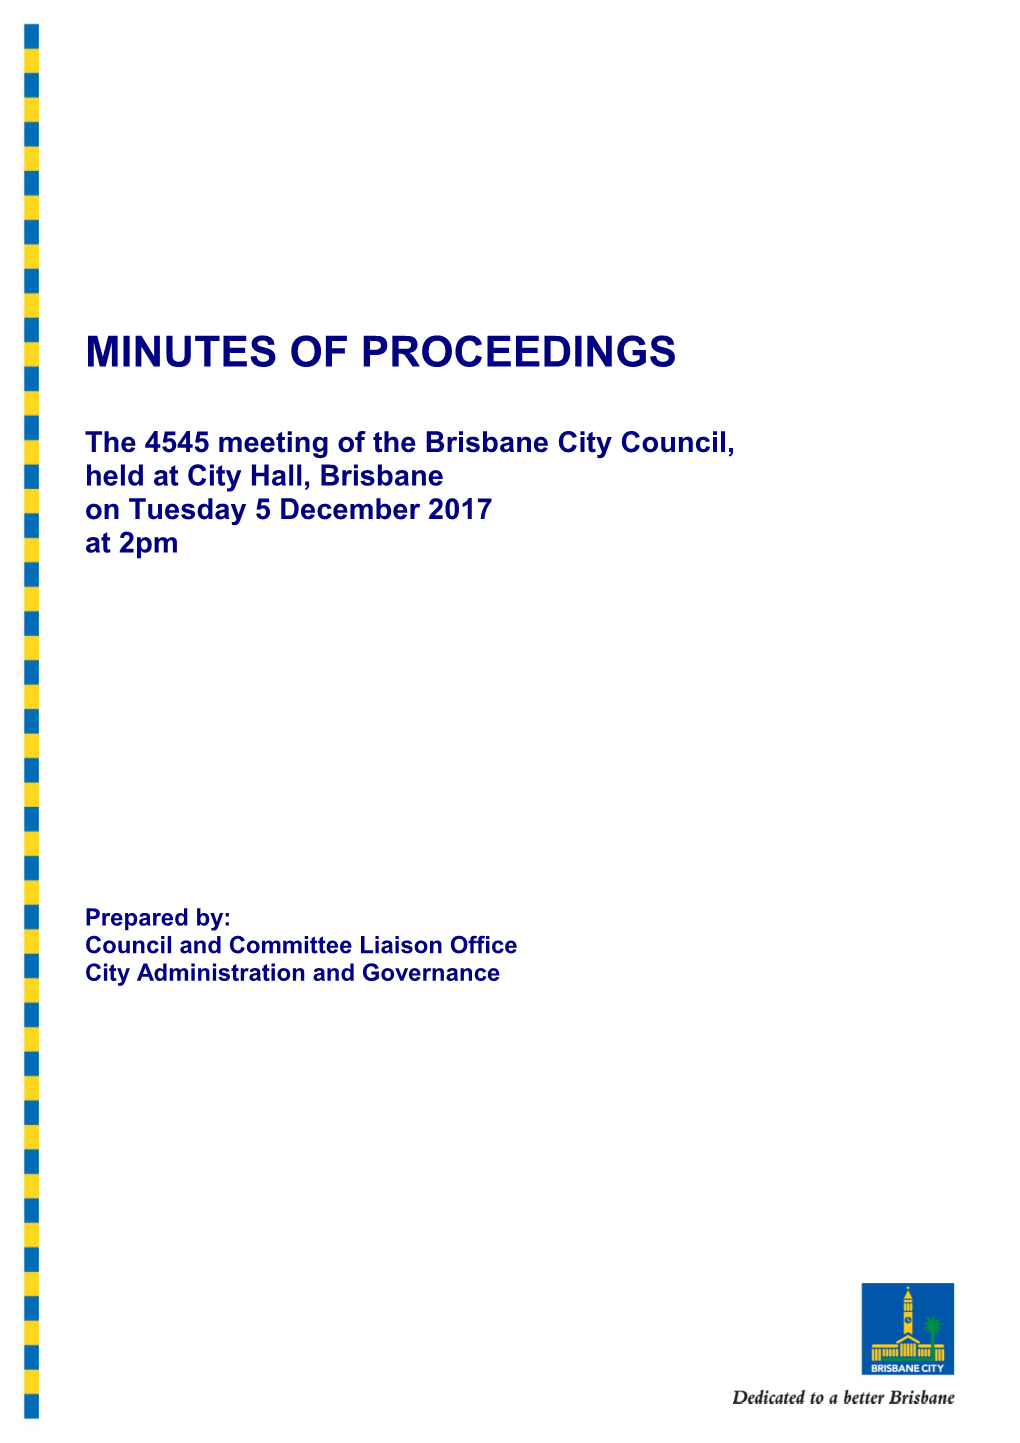 The 4545 Meeting of the Brisbane City Council